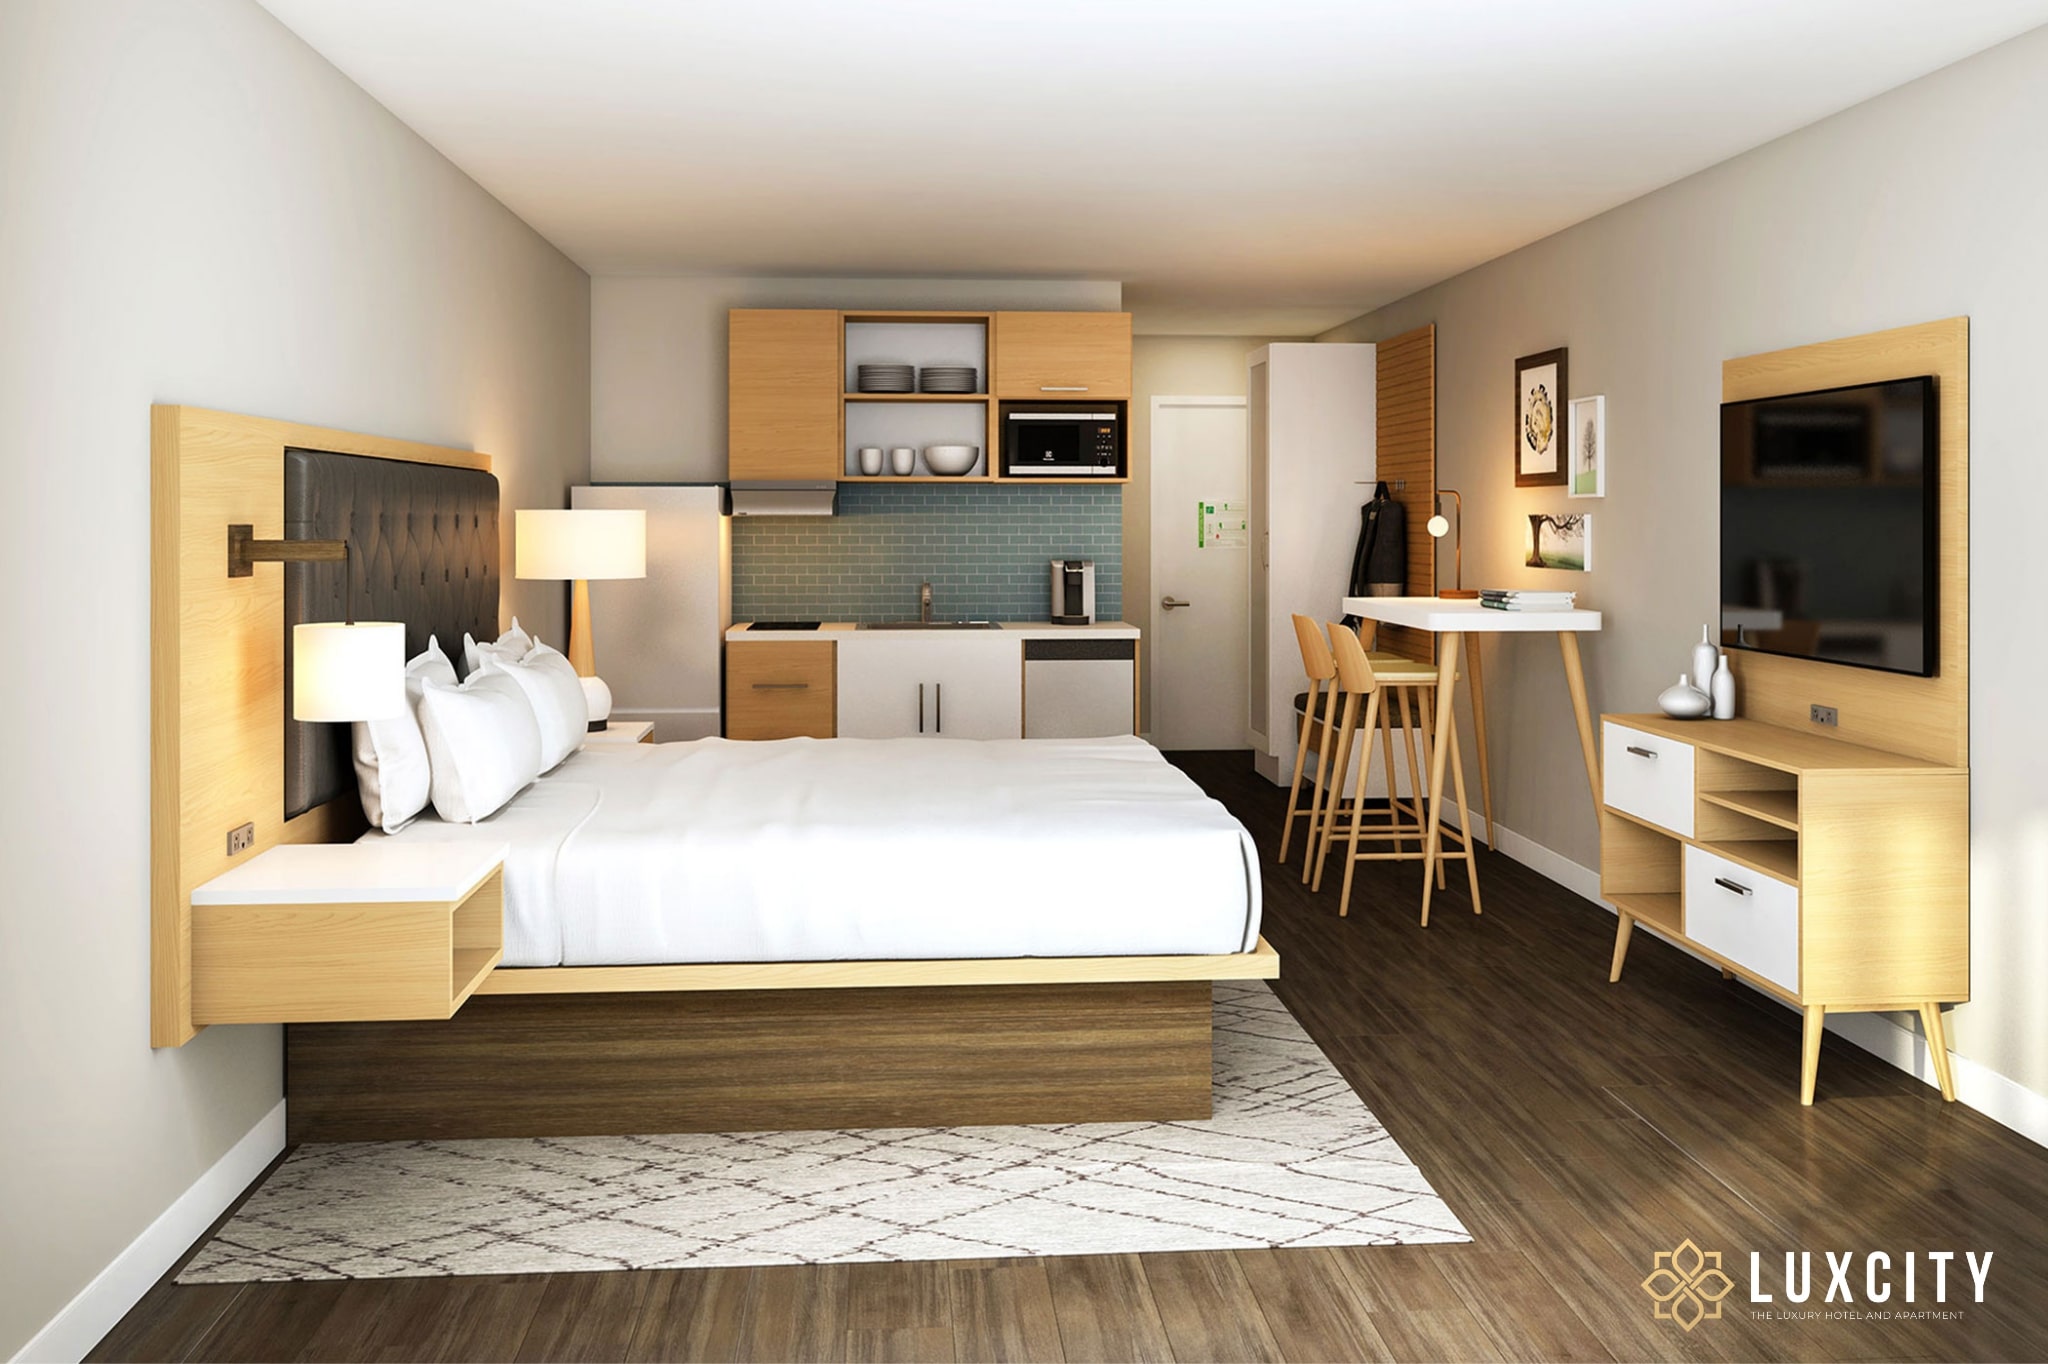 A long-term stay hotel will be very suitable for travelers who want to live here and there.